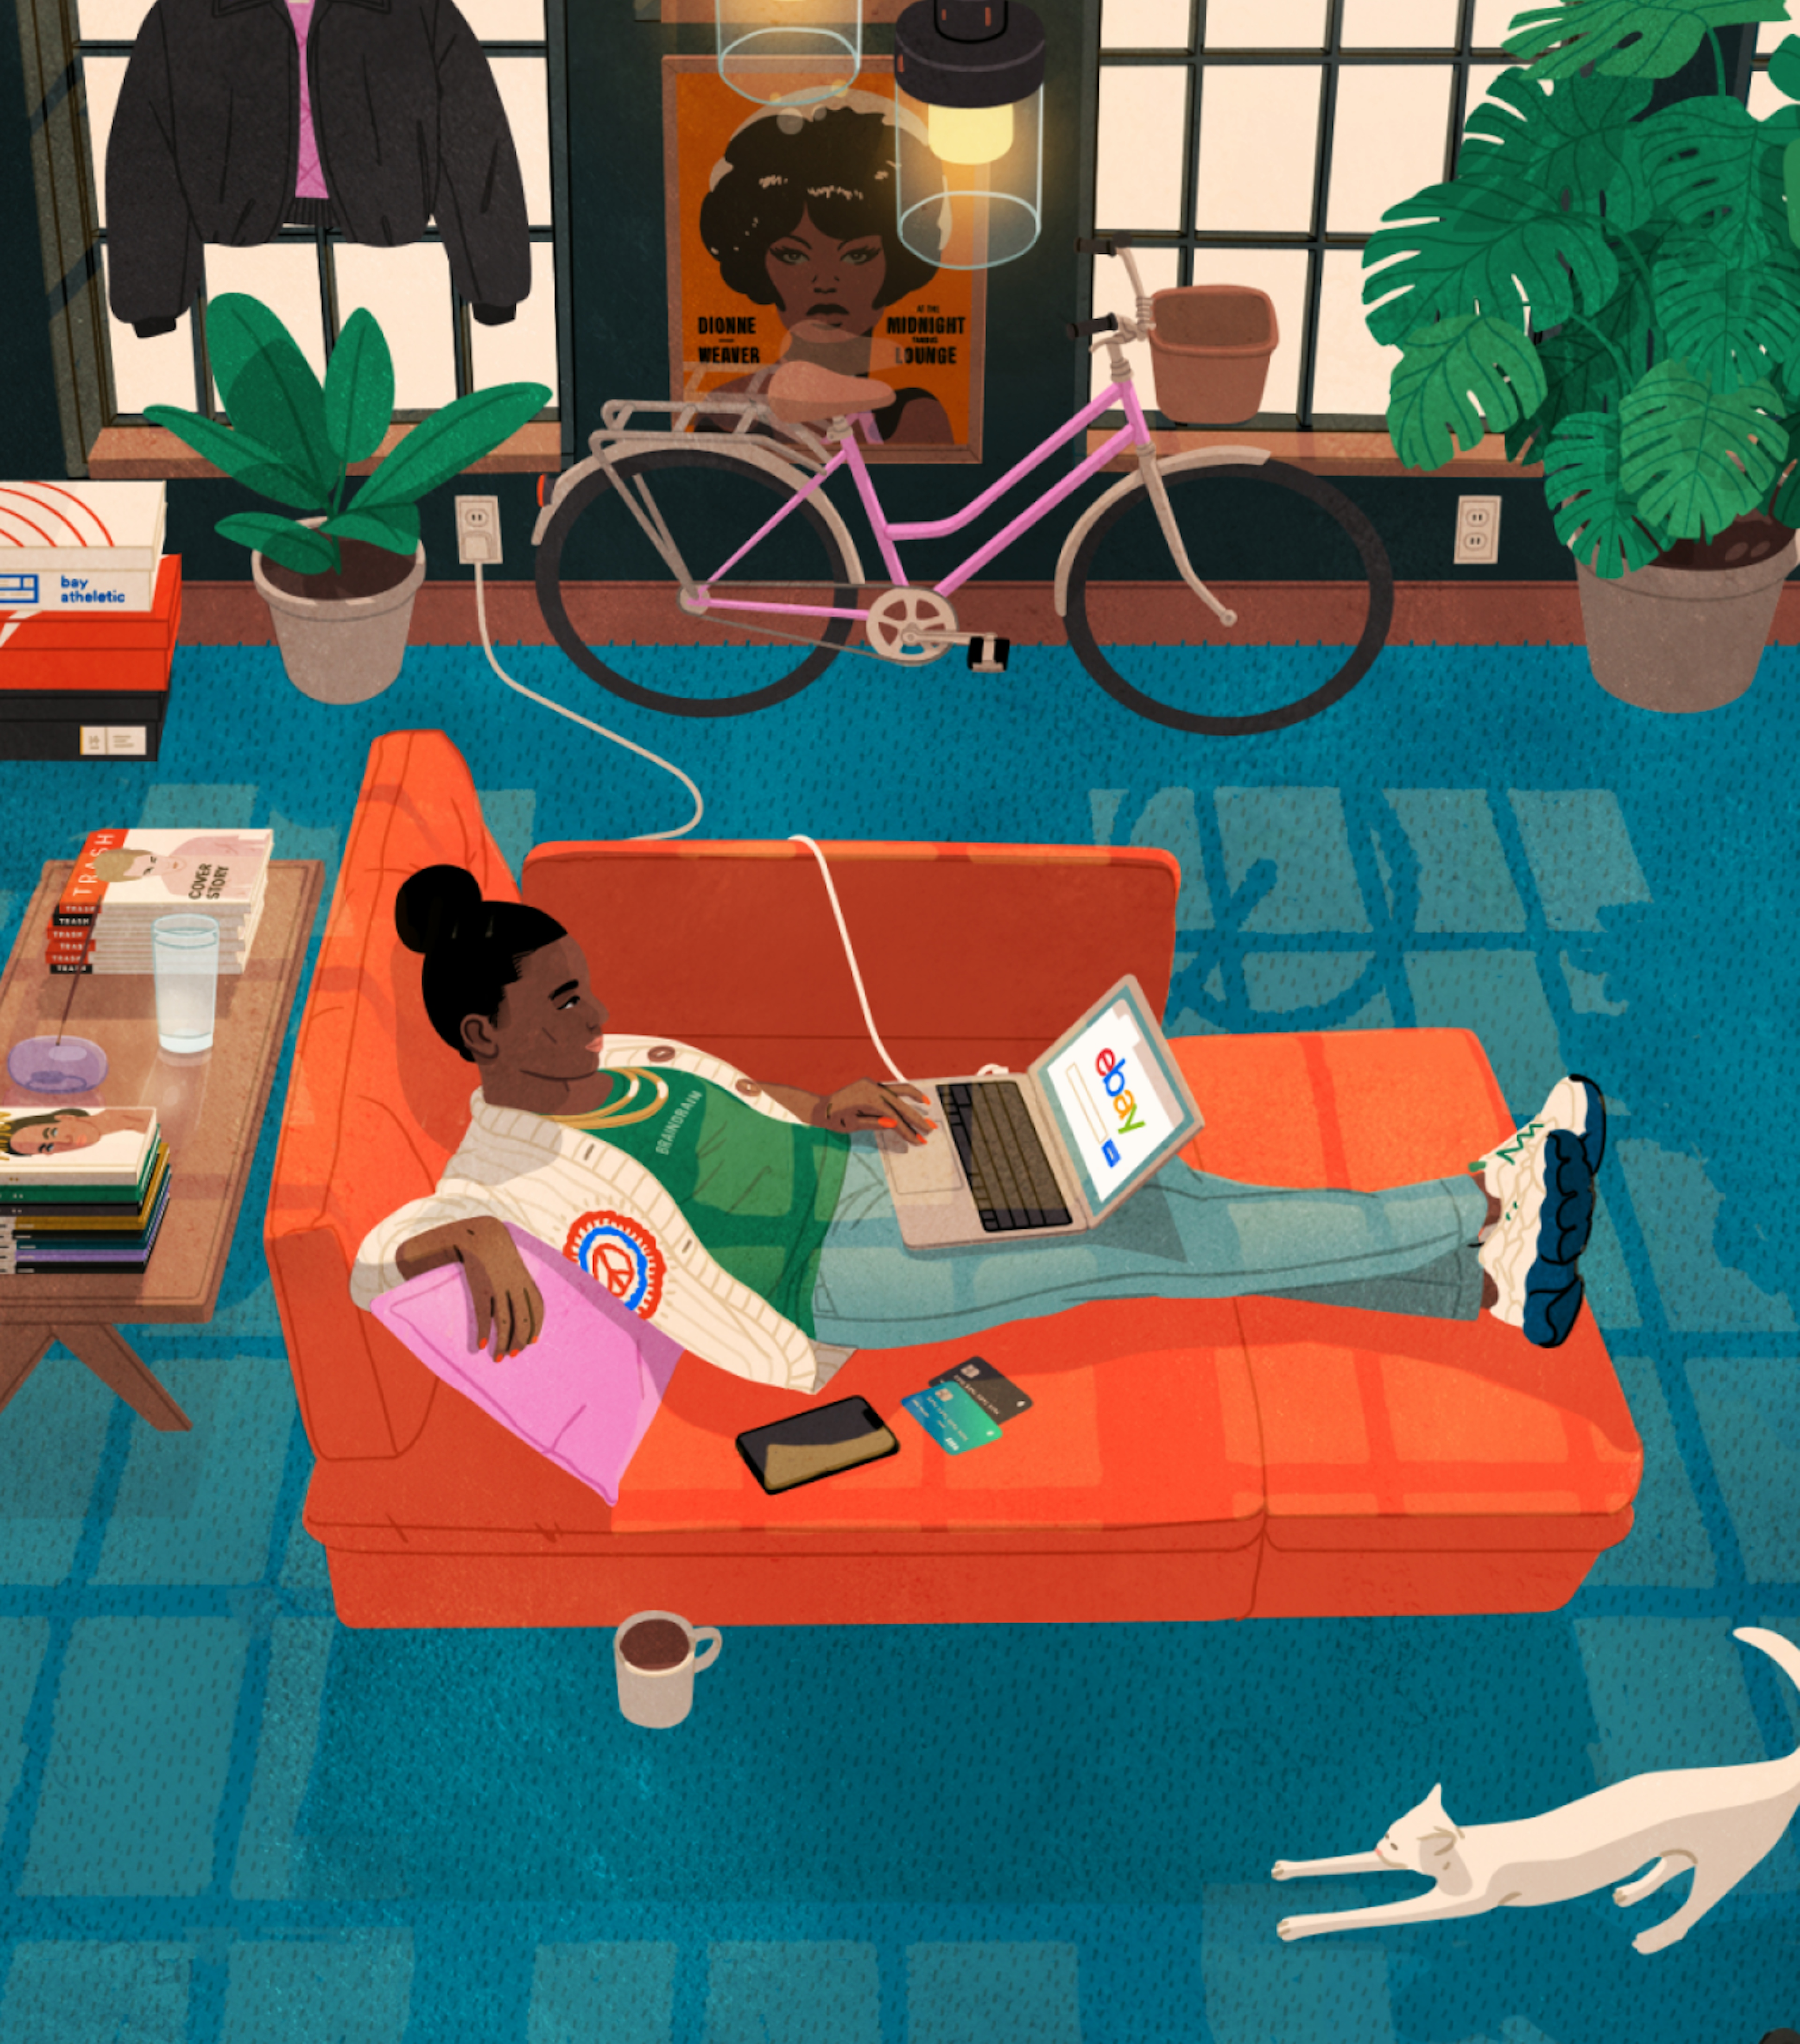 An illustrated scene of a woman lying down on a bright orange sofa scrolling on her computer. She is in a stylish apartment with a bike, plants, cat, table, and bright blue rug.